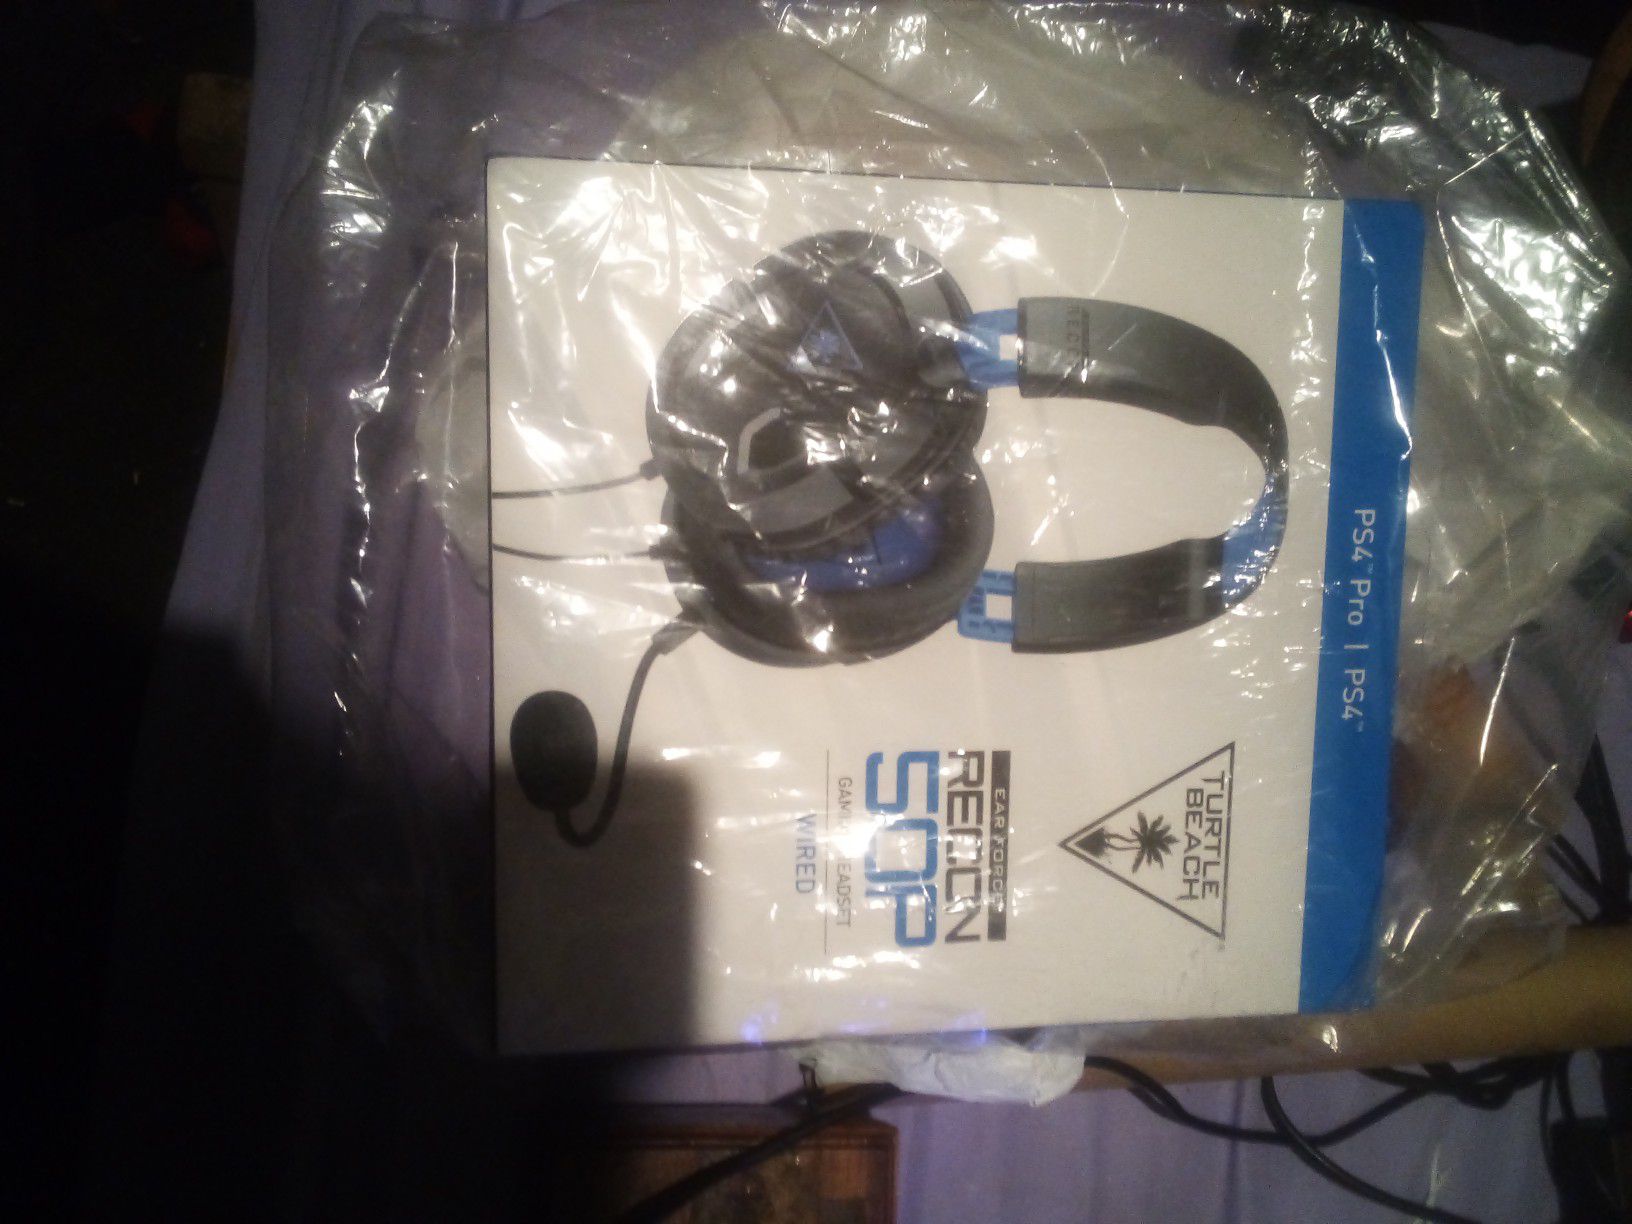 Ps4 headset